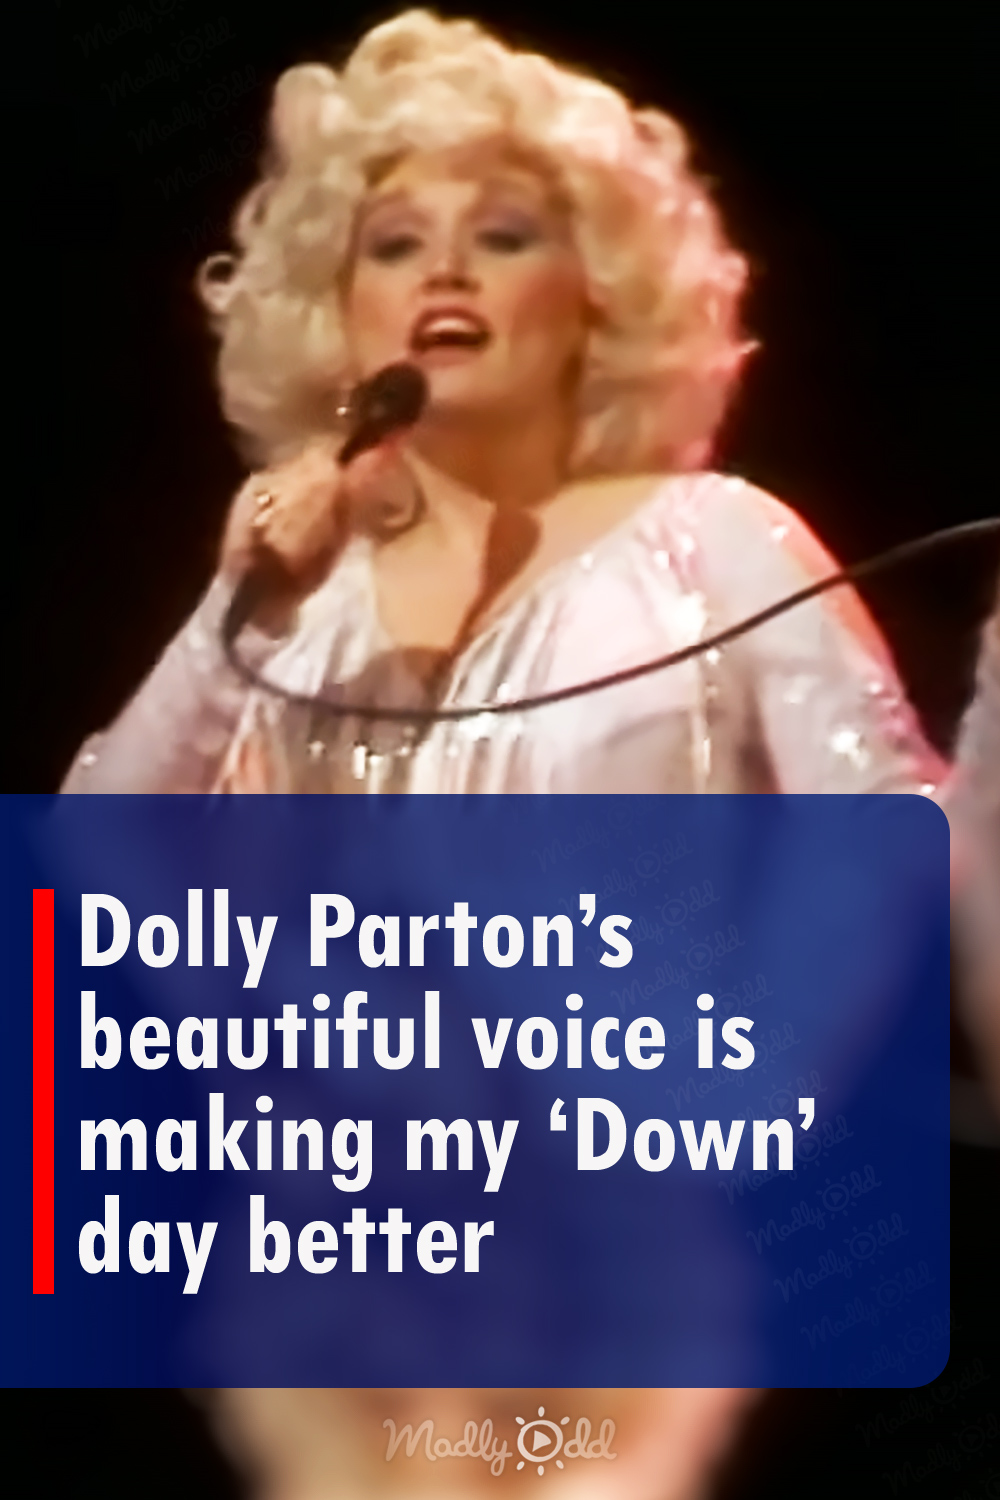 Dolly Parton’s beautiful voice is making my ‘Down’ day better